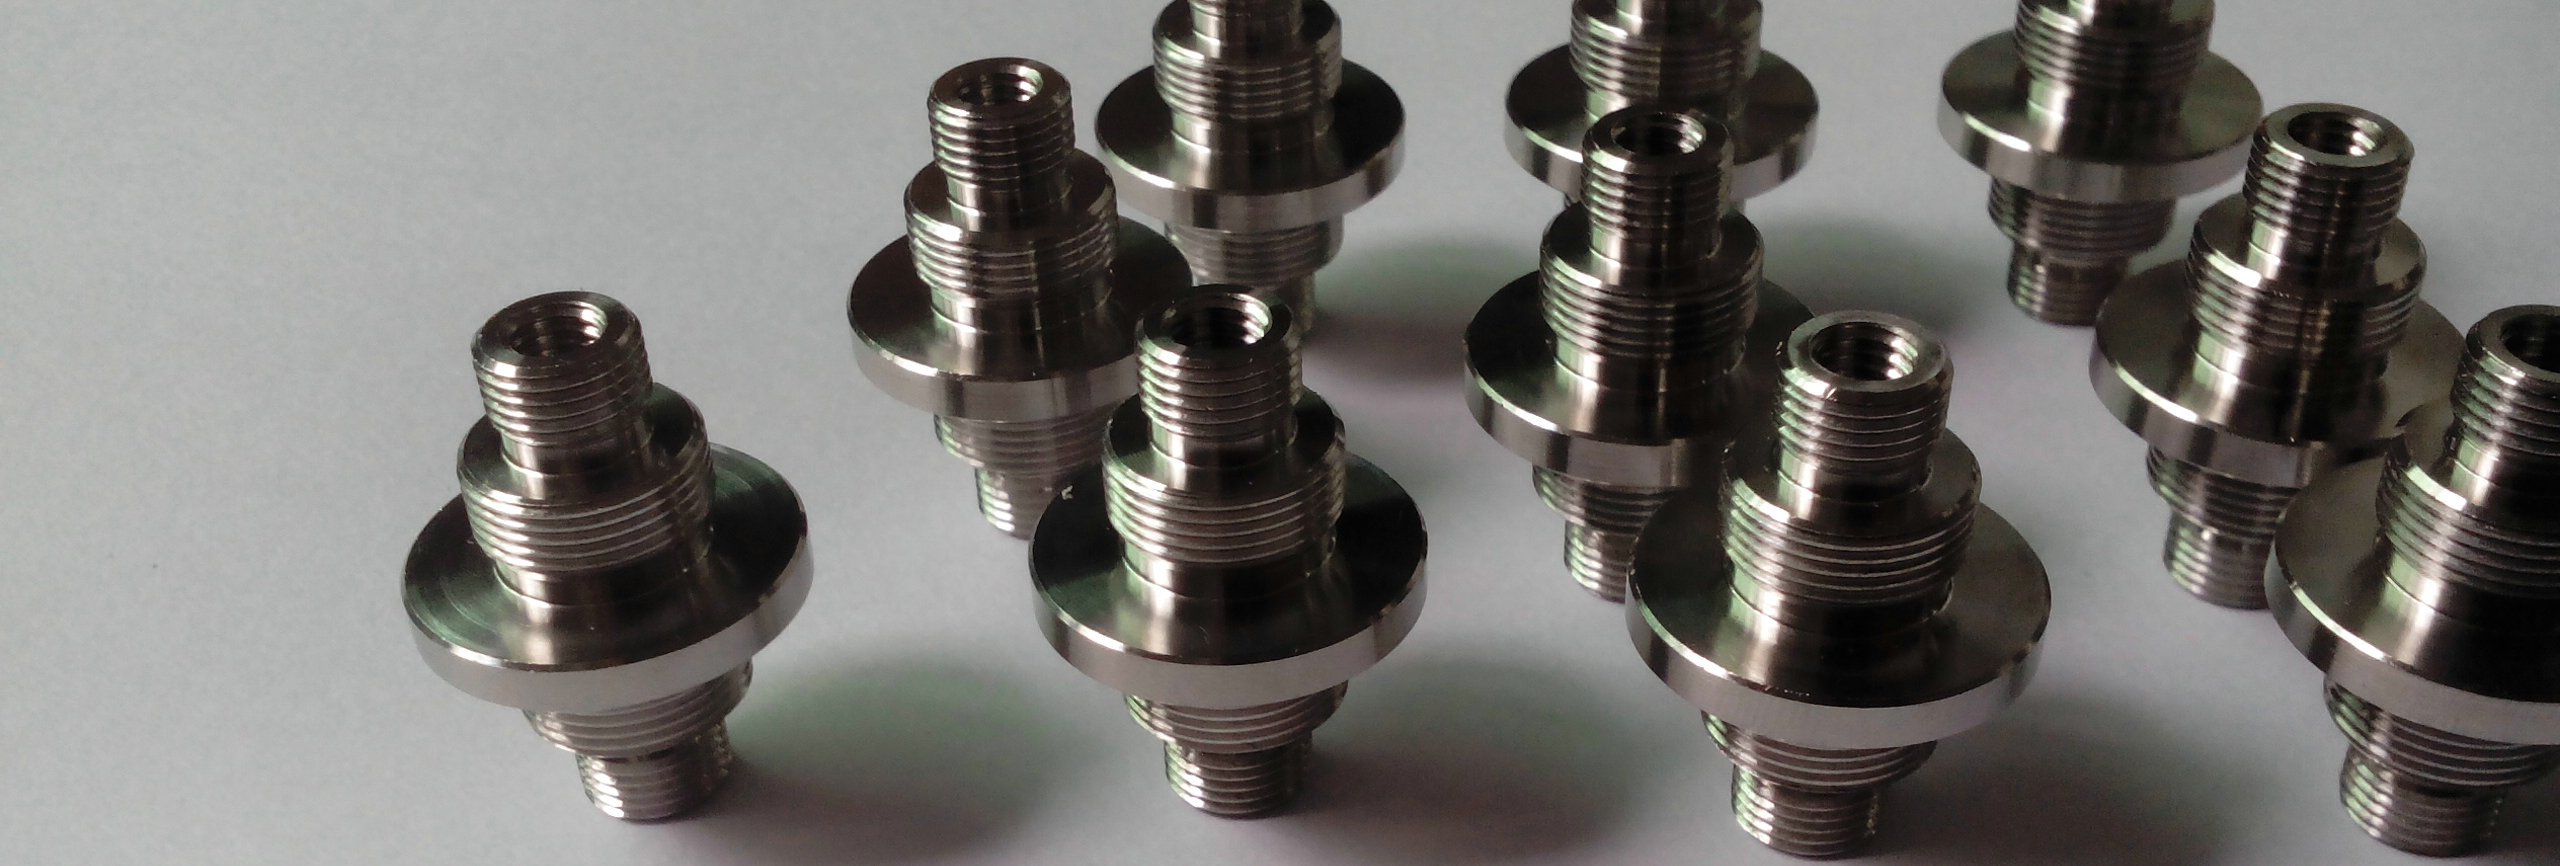 tailor-made precision 316 stainless steel CNC turning parts